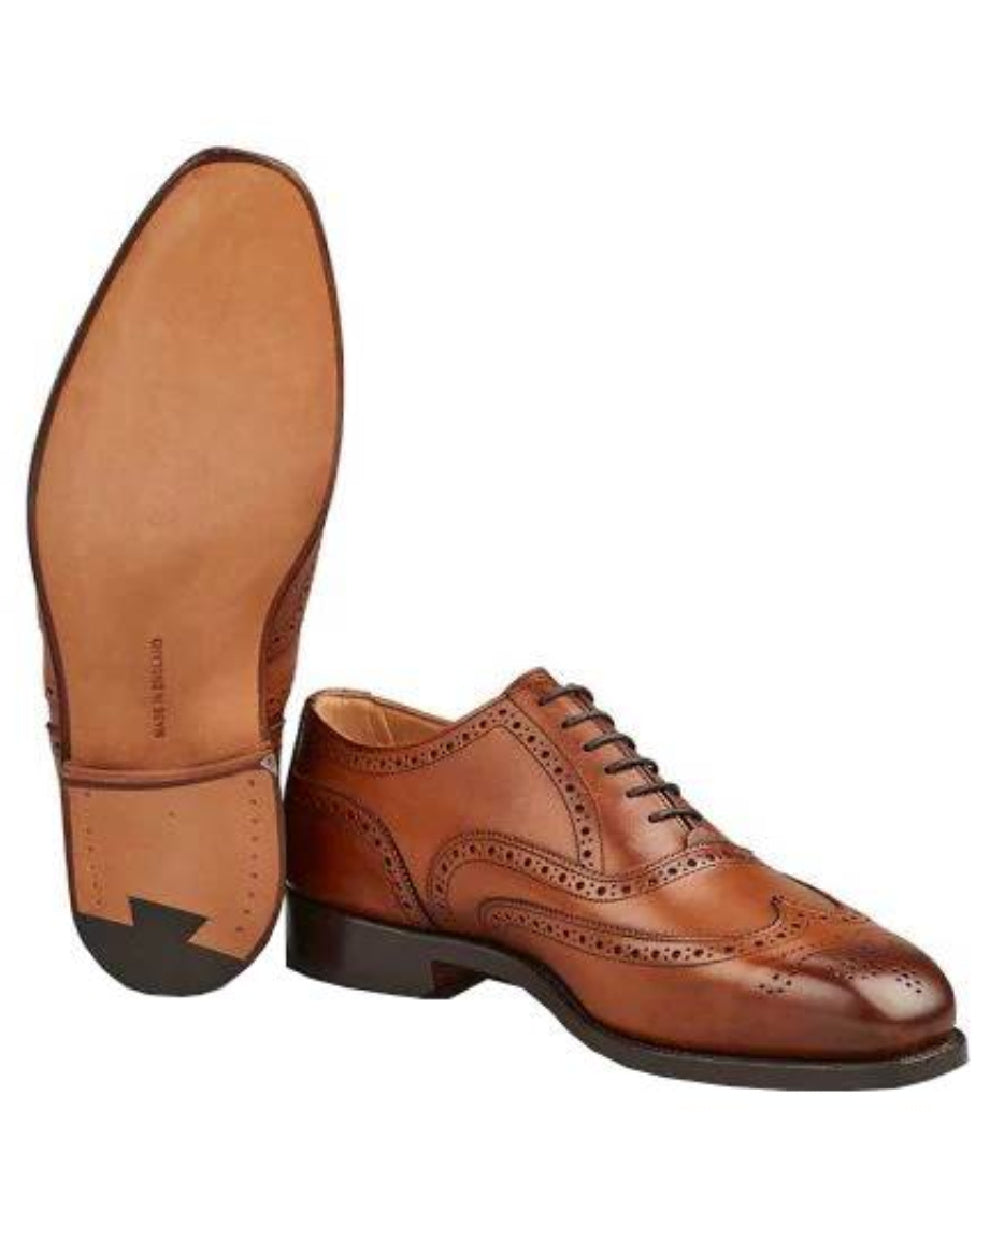 Beechnut Burnished Coloured Trickers Picadilly Leather Sole Brogue Oxford City Shoe On A White Background 